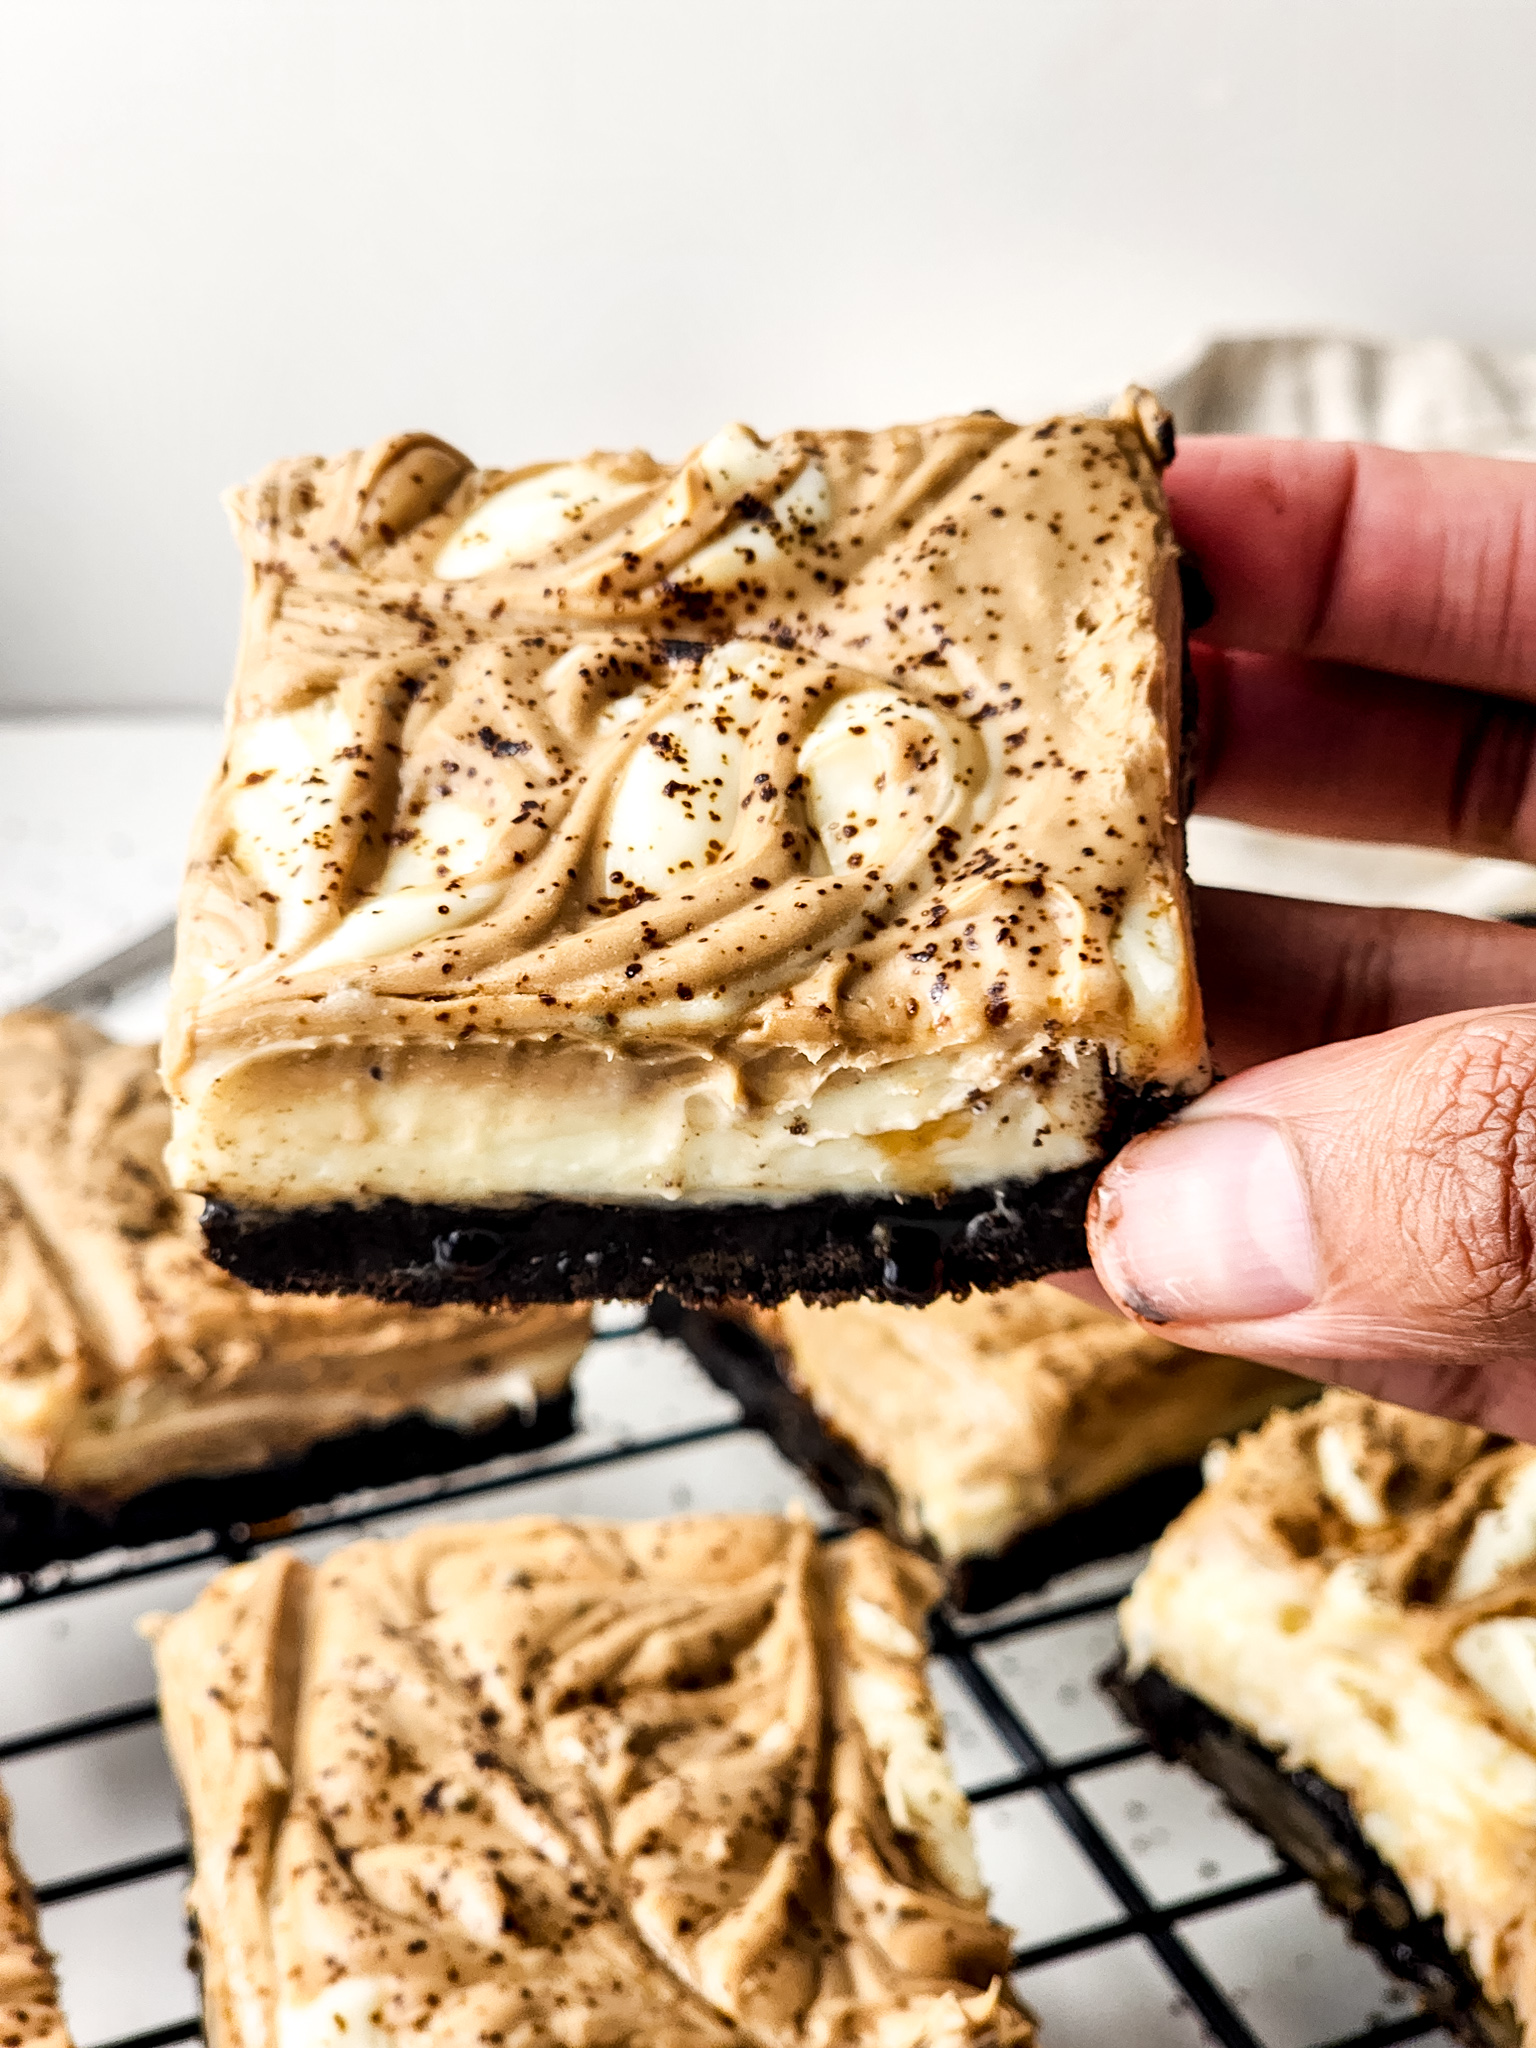 Hand holding finished Cheesecake Bars.